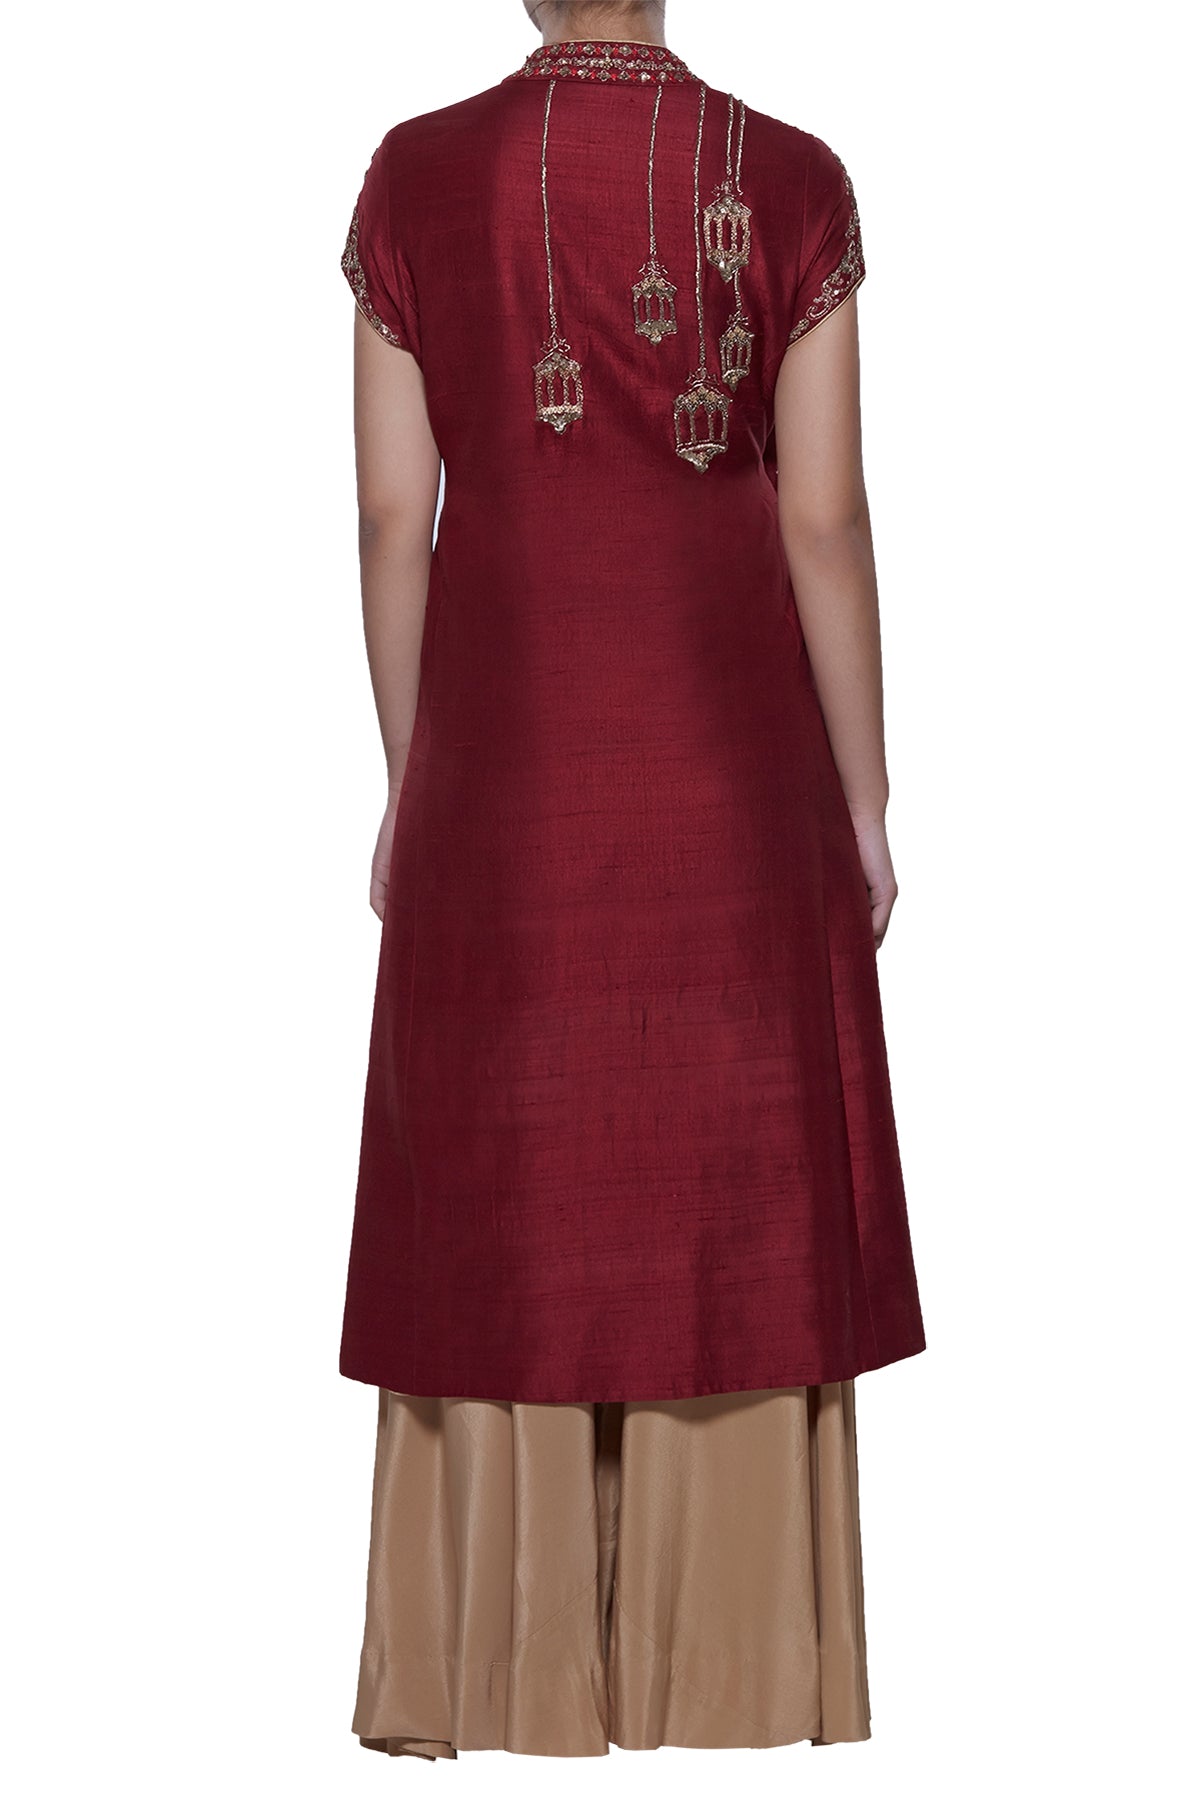 Cotton Western Style Kurtis with Palazzo Pant at Rs 449/piece in Surat |  ID: 23146294133